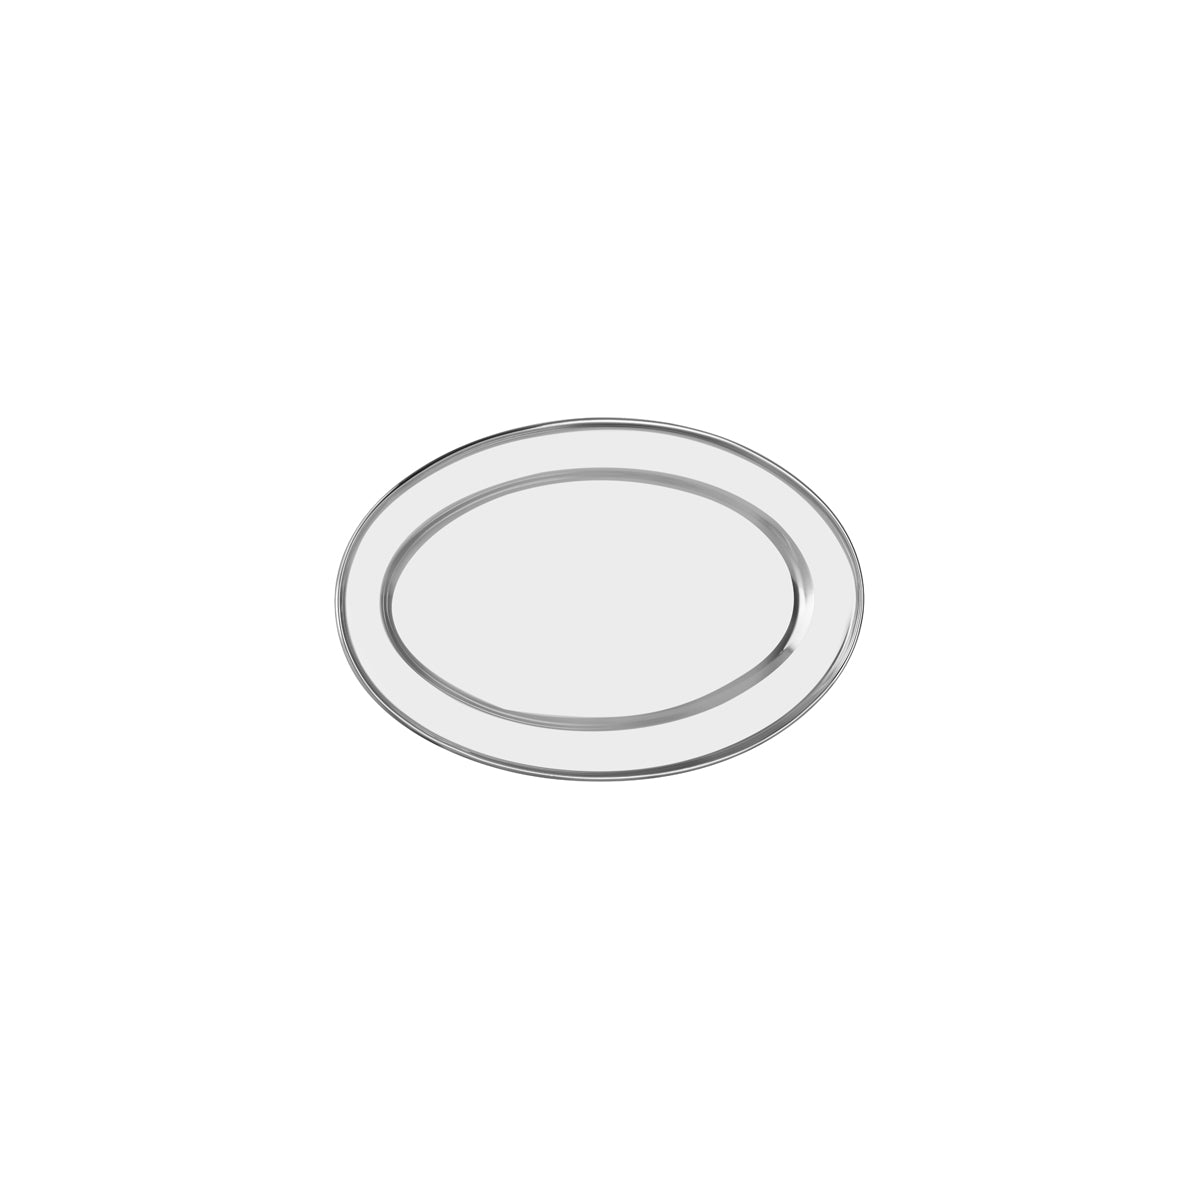 70712 Chef Inox Oval Platter Rolled Edge Stainless Steel 300x210mm Tomkin Australia Hospitality Supplies